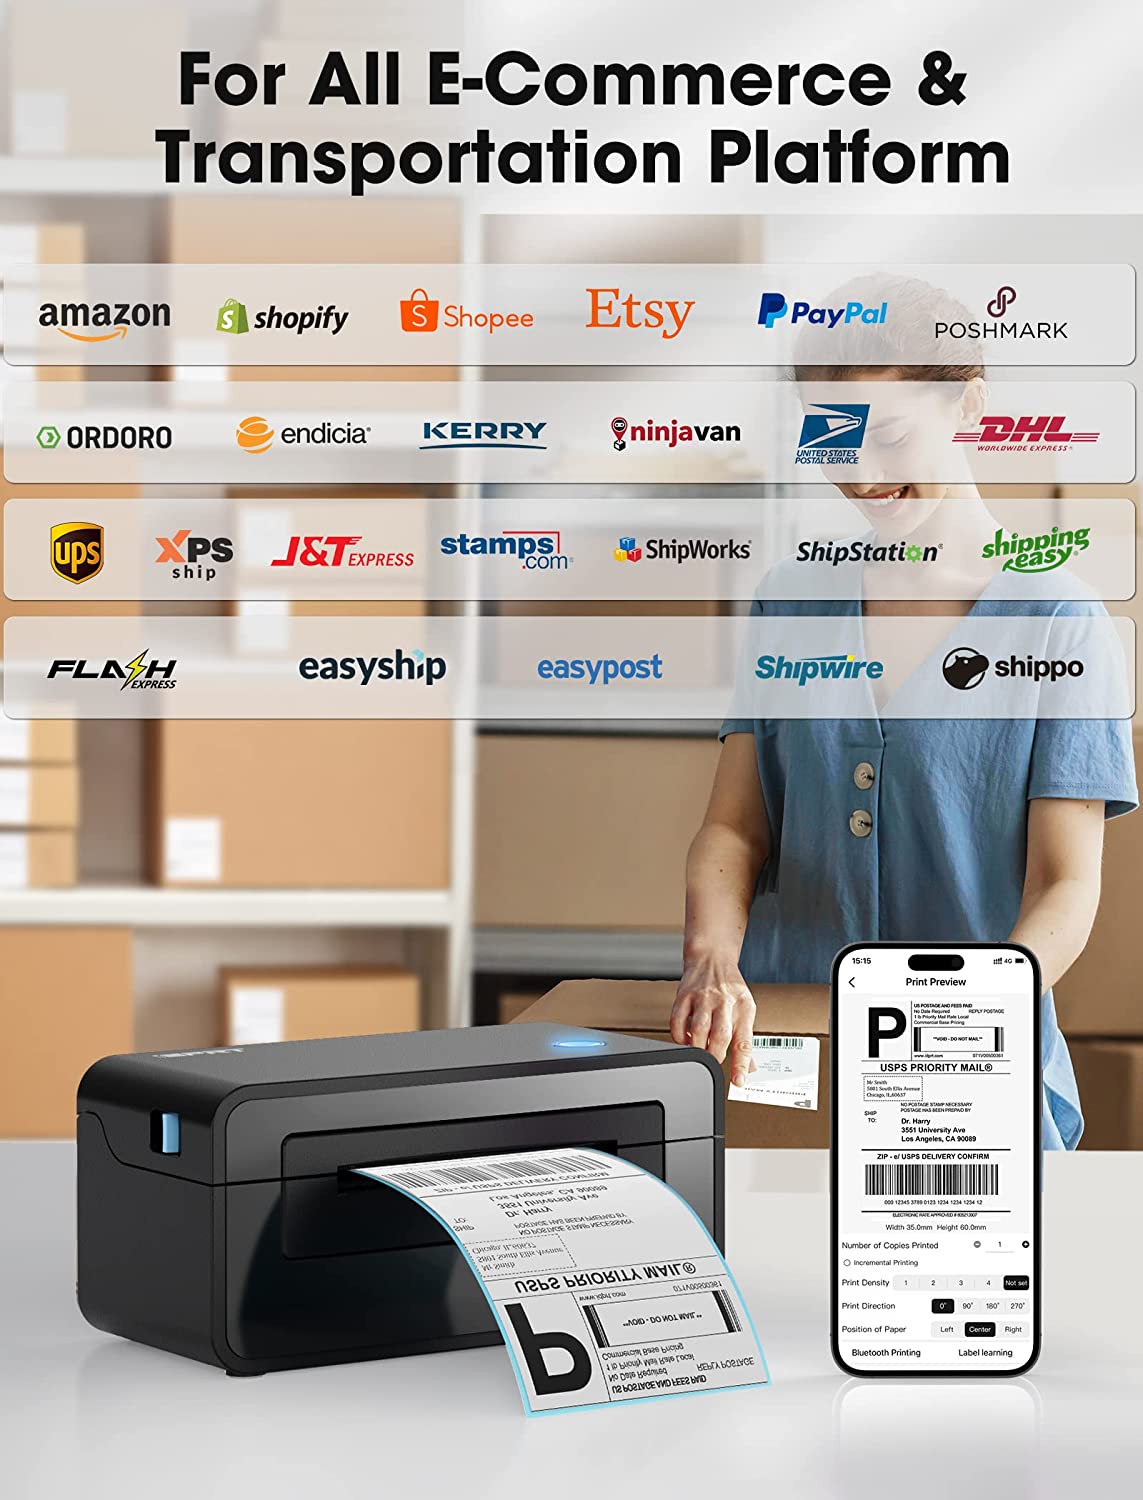 iDPRT A4 Thermal Printer, Inkless Printer, 300dpi Resolution 4ips Fast A4  Paper Printer with Auto Cutting, 100 Sheets Capacity, Compact Design